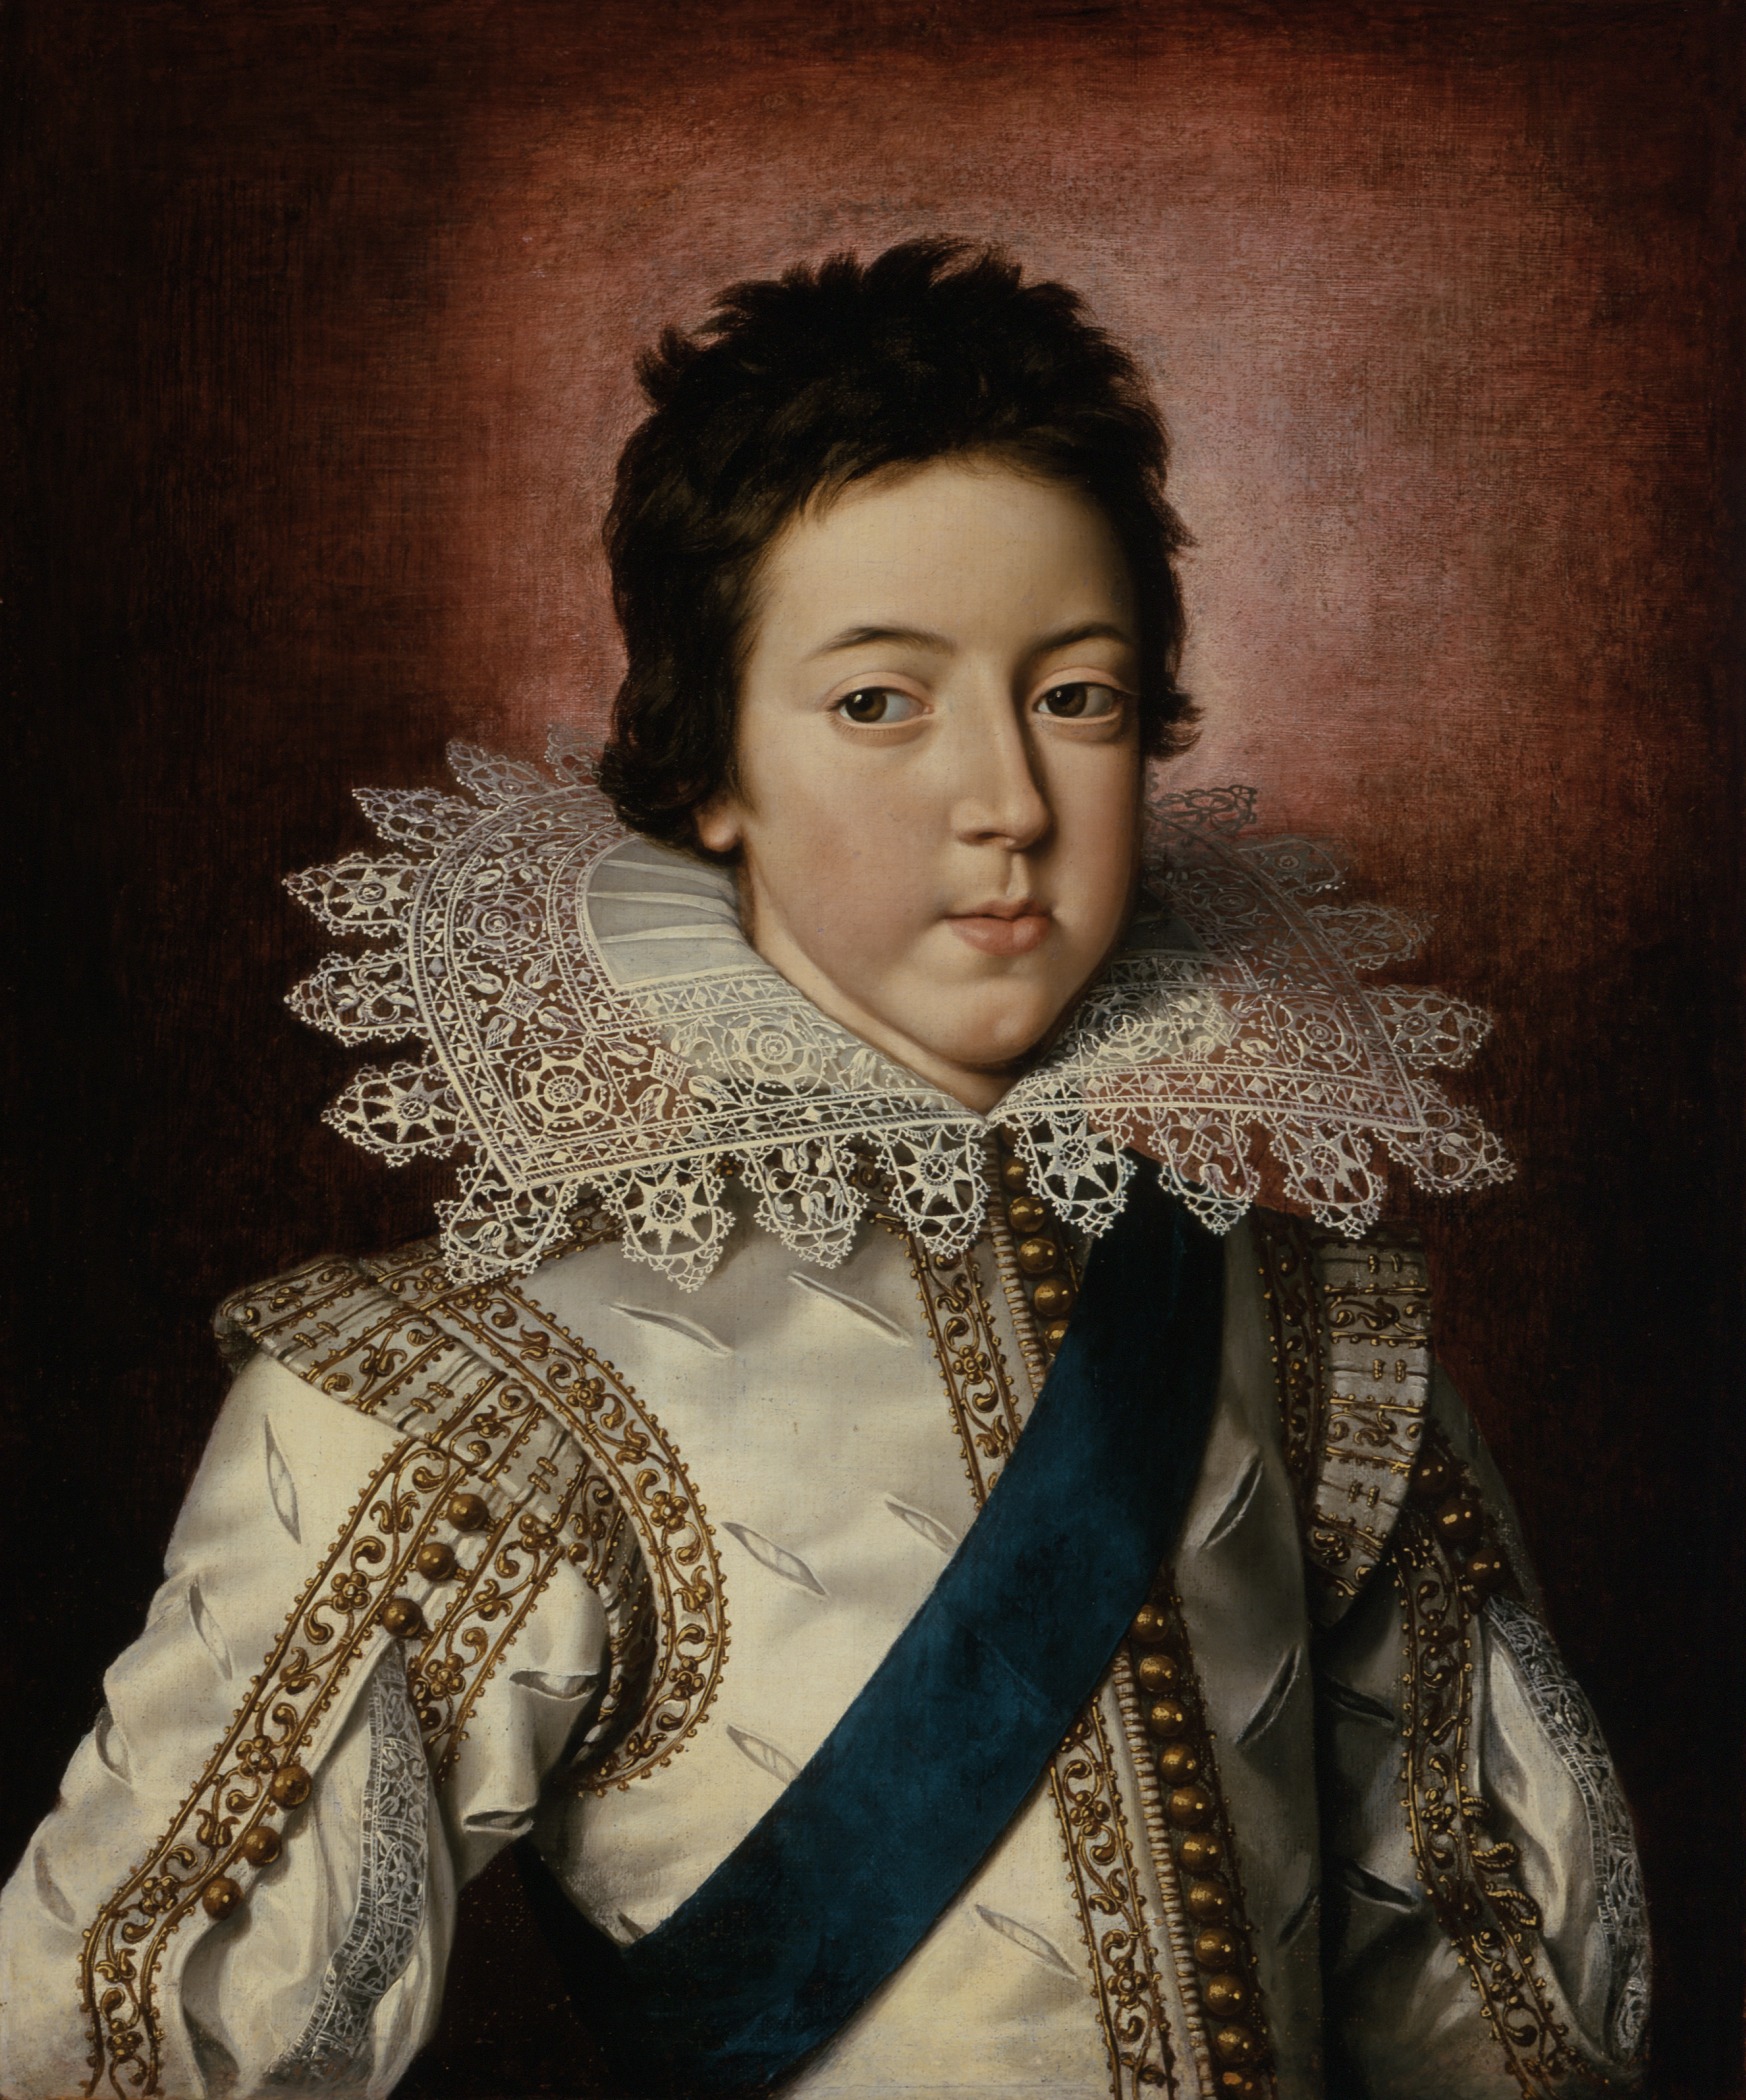 a young man in an old - fashioned white gown with a blue sash